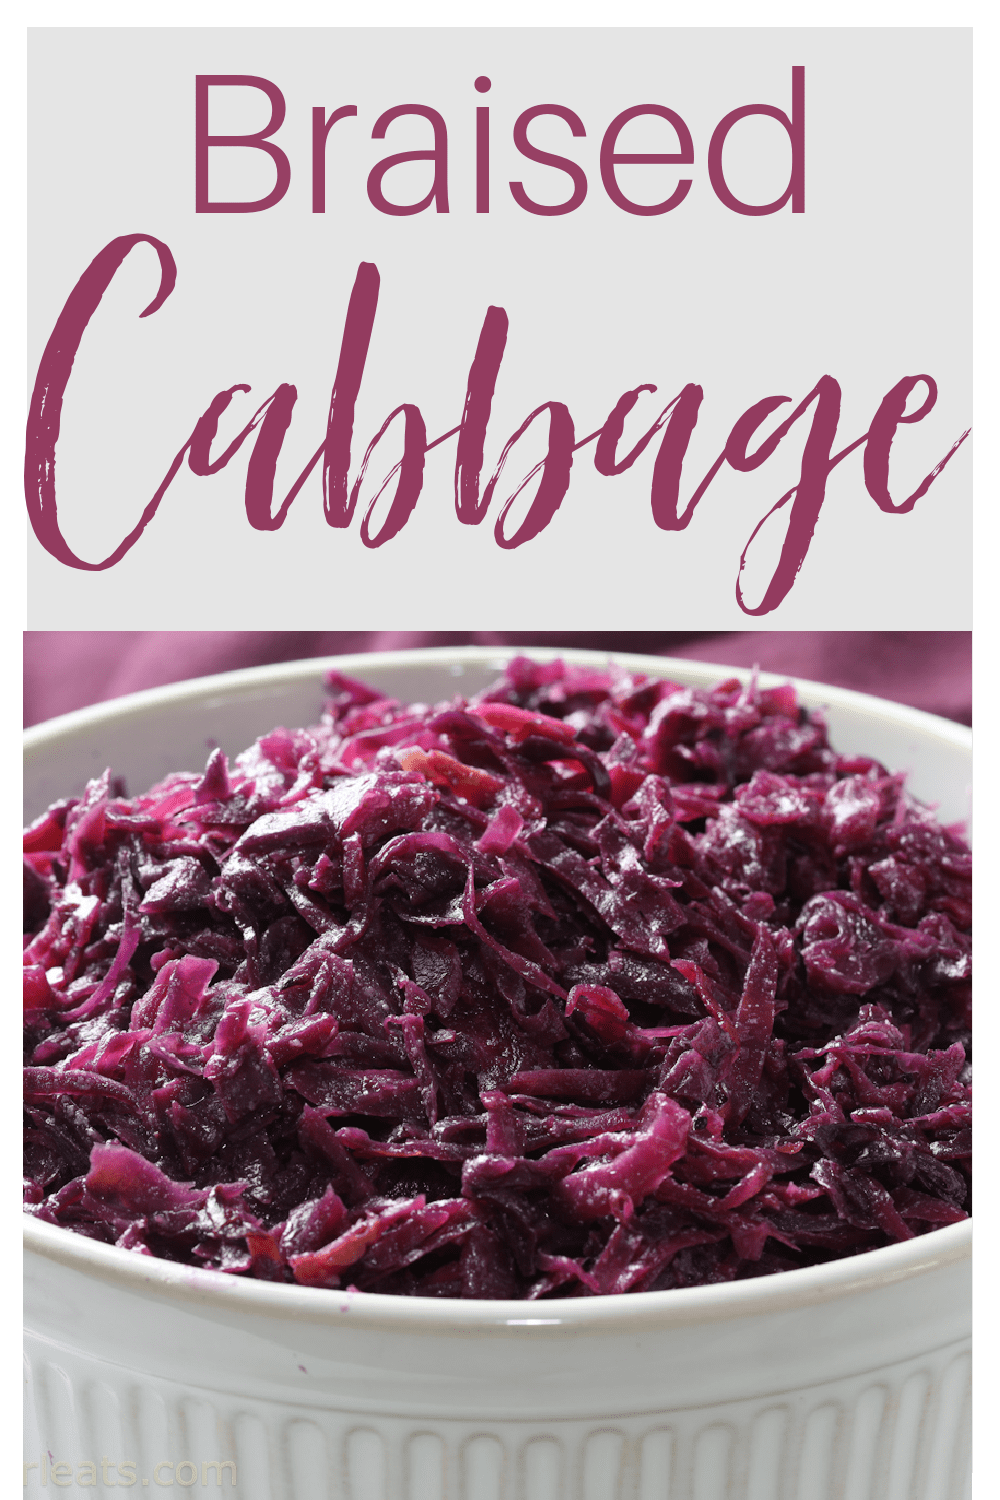 Braised red cabbage is a delicious Swedish side dish that's slow cooked, slightly sweet and perfect with pork or chicken.